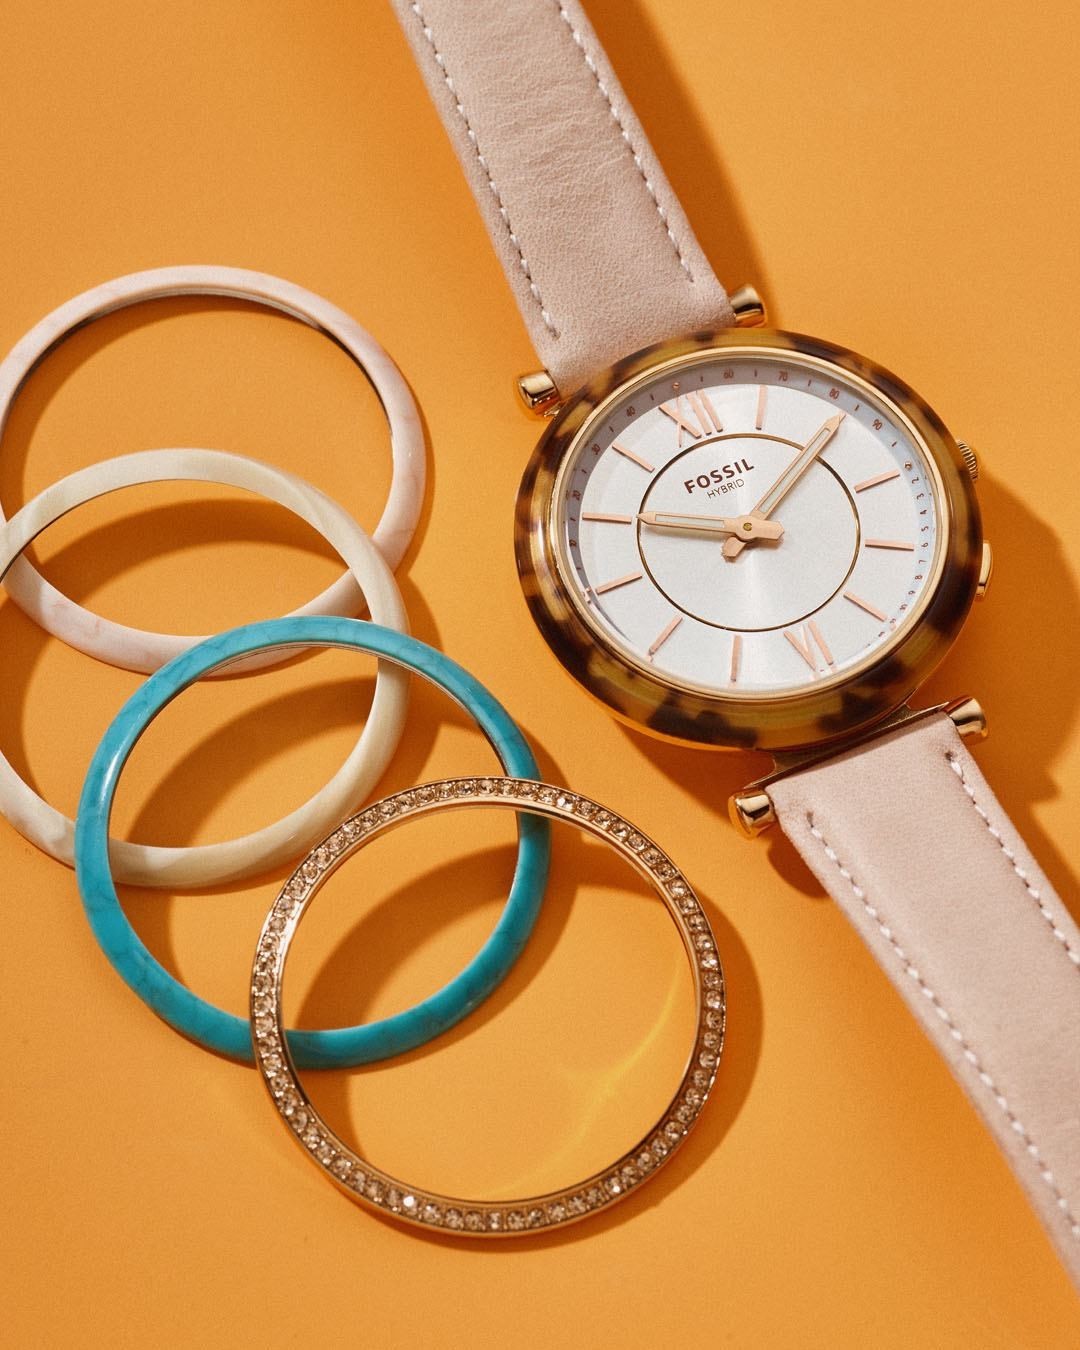 Watches2U - Always good to have options, right? Now you can have a new watch look for every weekday.⁠
⁠
⌚Fossil Ladies FTW5042SET Gift Set⁠
⁠📷@Fossil⁠
⁠
.⁠
.⁠
.⁠
⁠
#Fossil #w2u #watches2u #timepiece #...